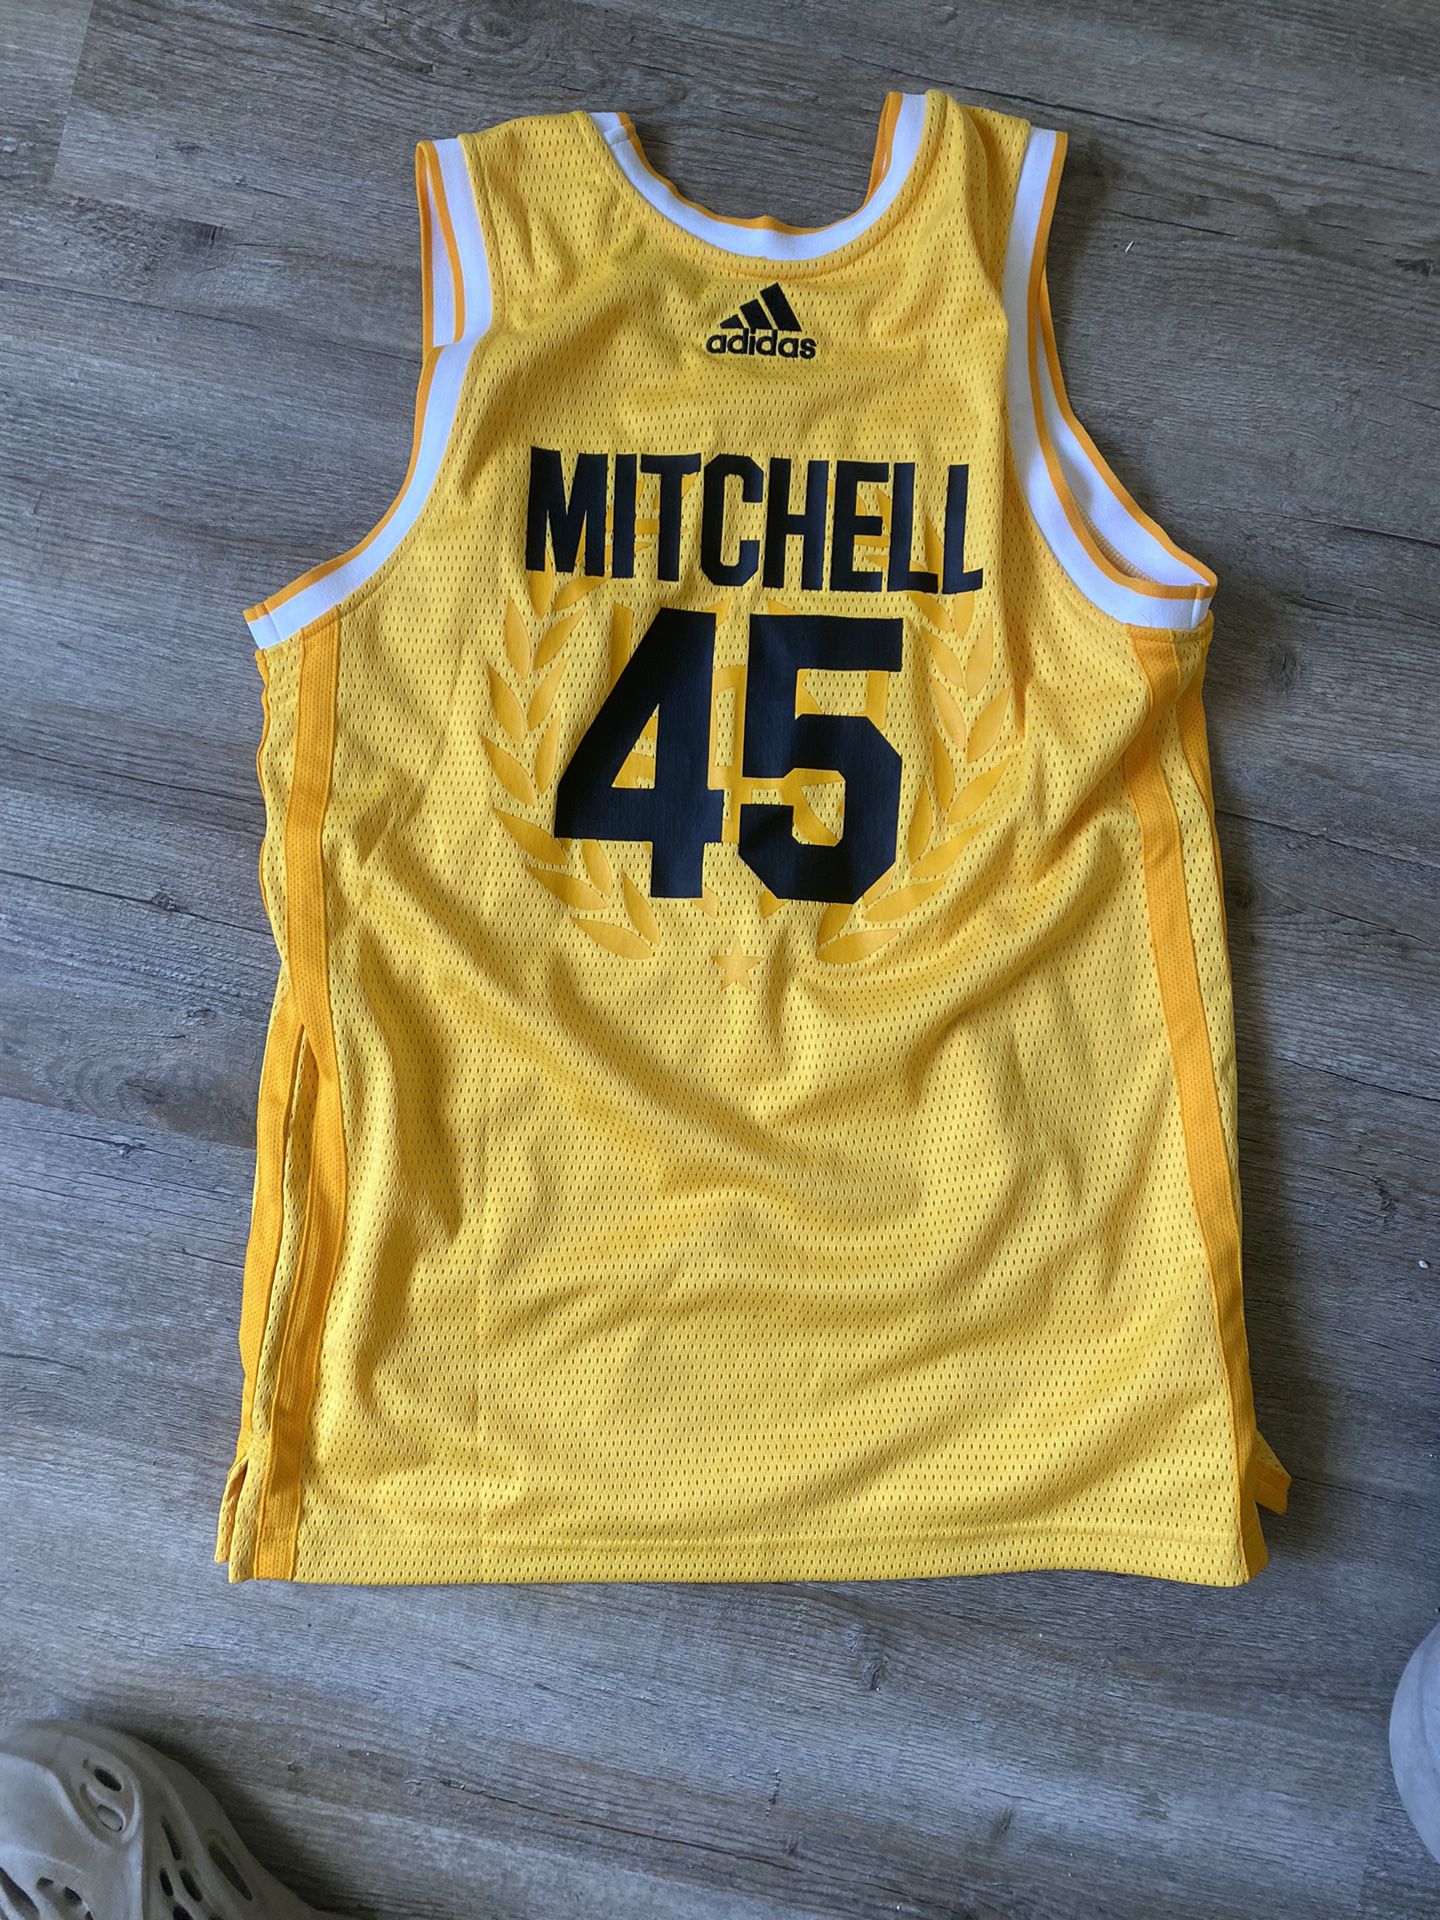 donovan mitchell jersey for sale